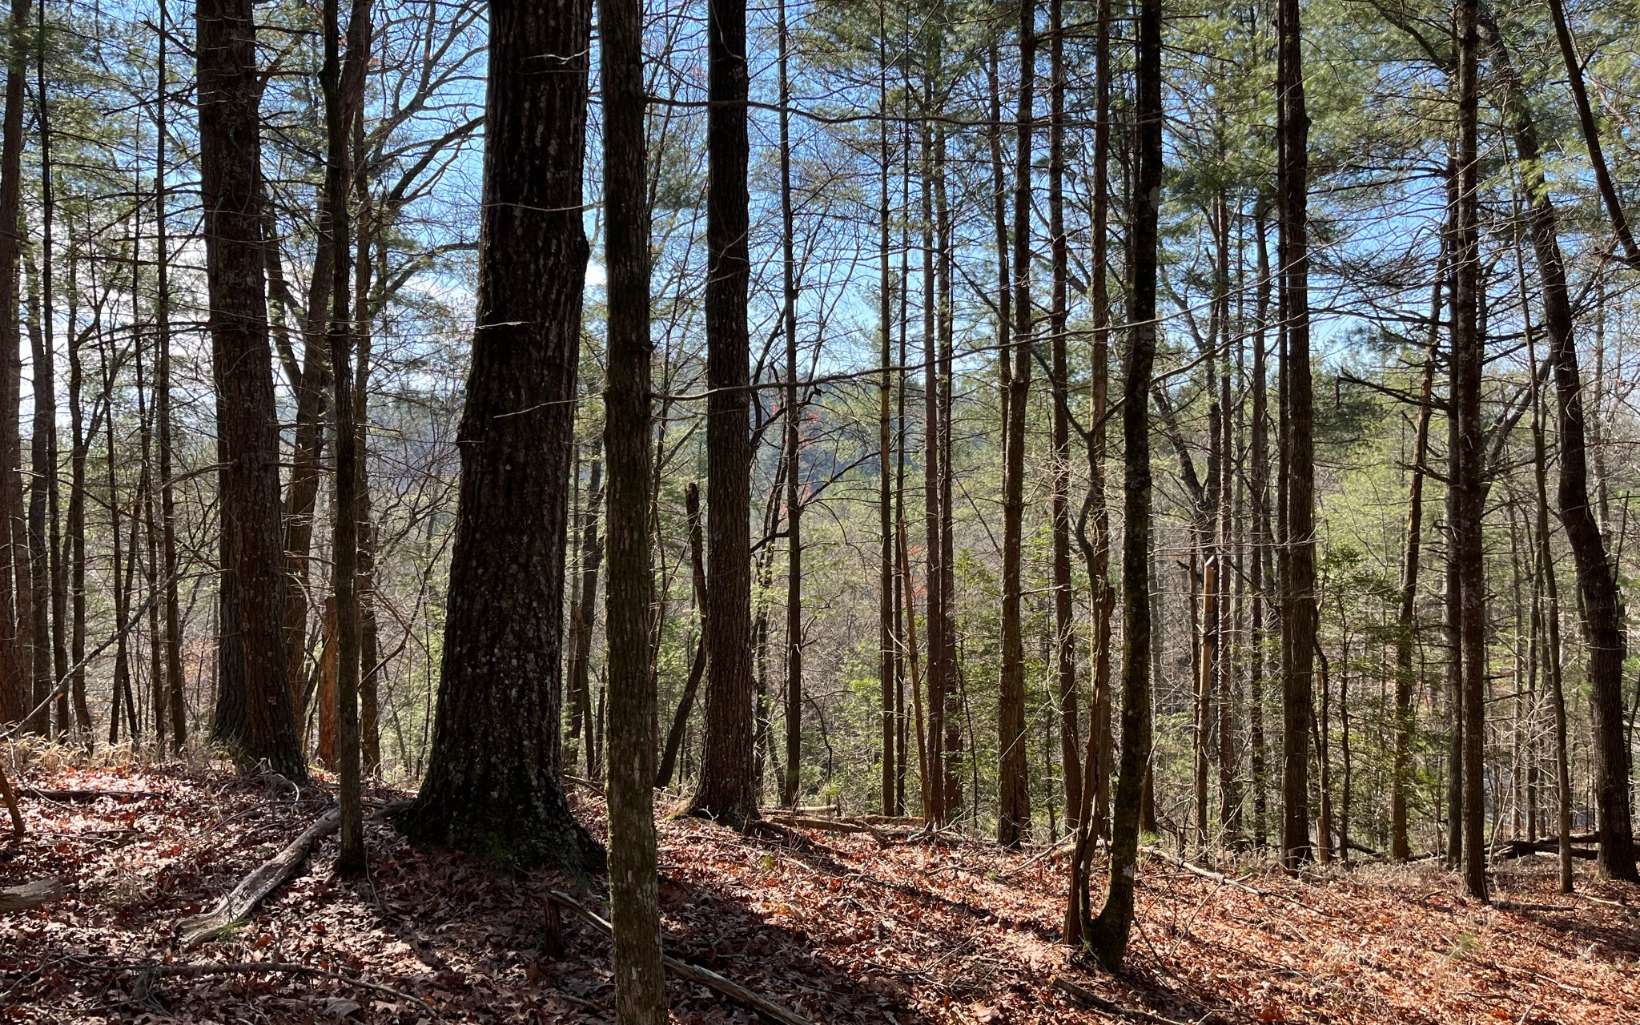 This 3+ acre MOUNTAIN VIEW lot in beautiful Pickett Mill is situated in one of the most scenic parts of Gilmer county and is an ideal place to build your mountain home! Long range views of the Cohutta Wilderness can be seen from a nice gentle building spot. Underground power, very well-maintained private roads, partial driveway clearing cut-in, & low HOA fees. The common area access and trail to E. Mountain Creek is just across the road. A short drive gets you to Ft. Mtn State Park, Lake Conasauga, or Nat’l Forest, yet only 10 minutes to downtown Ellijay’s unique local shops and dining.